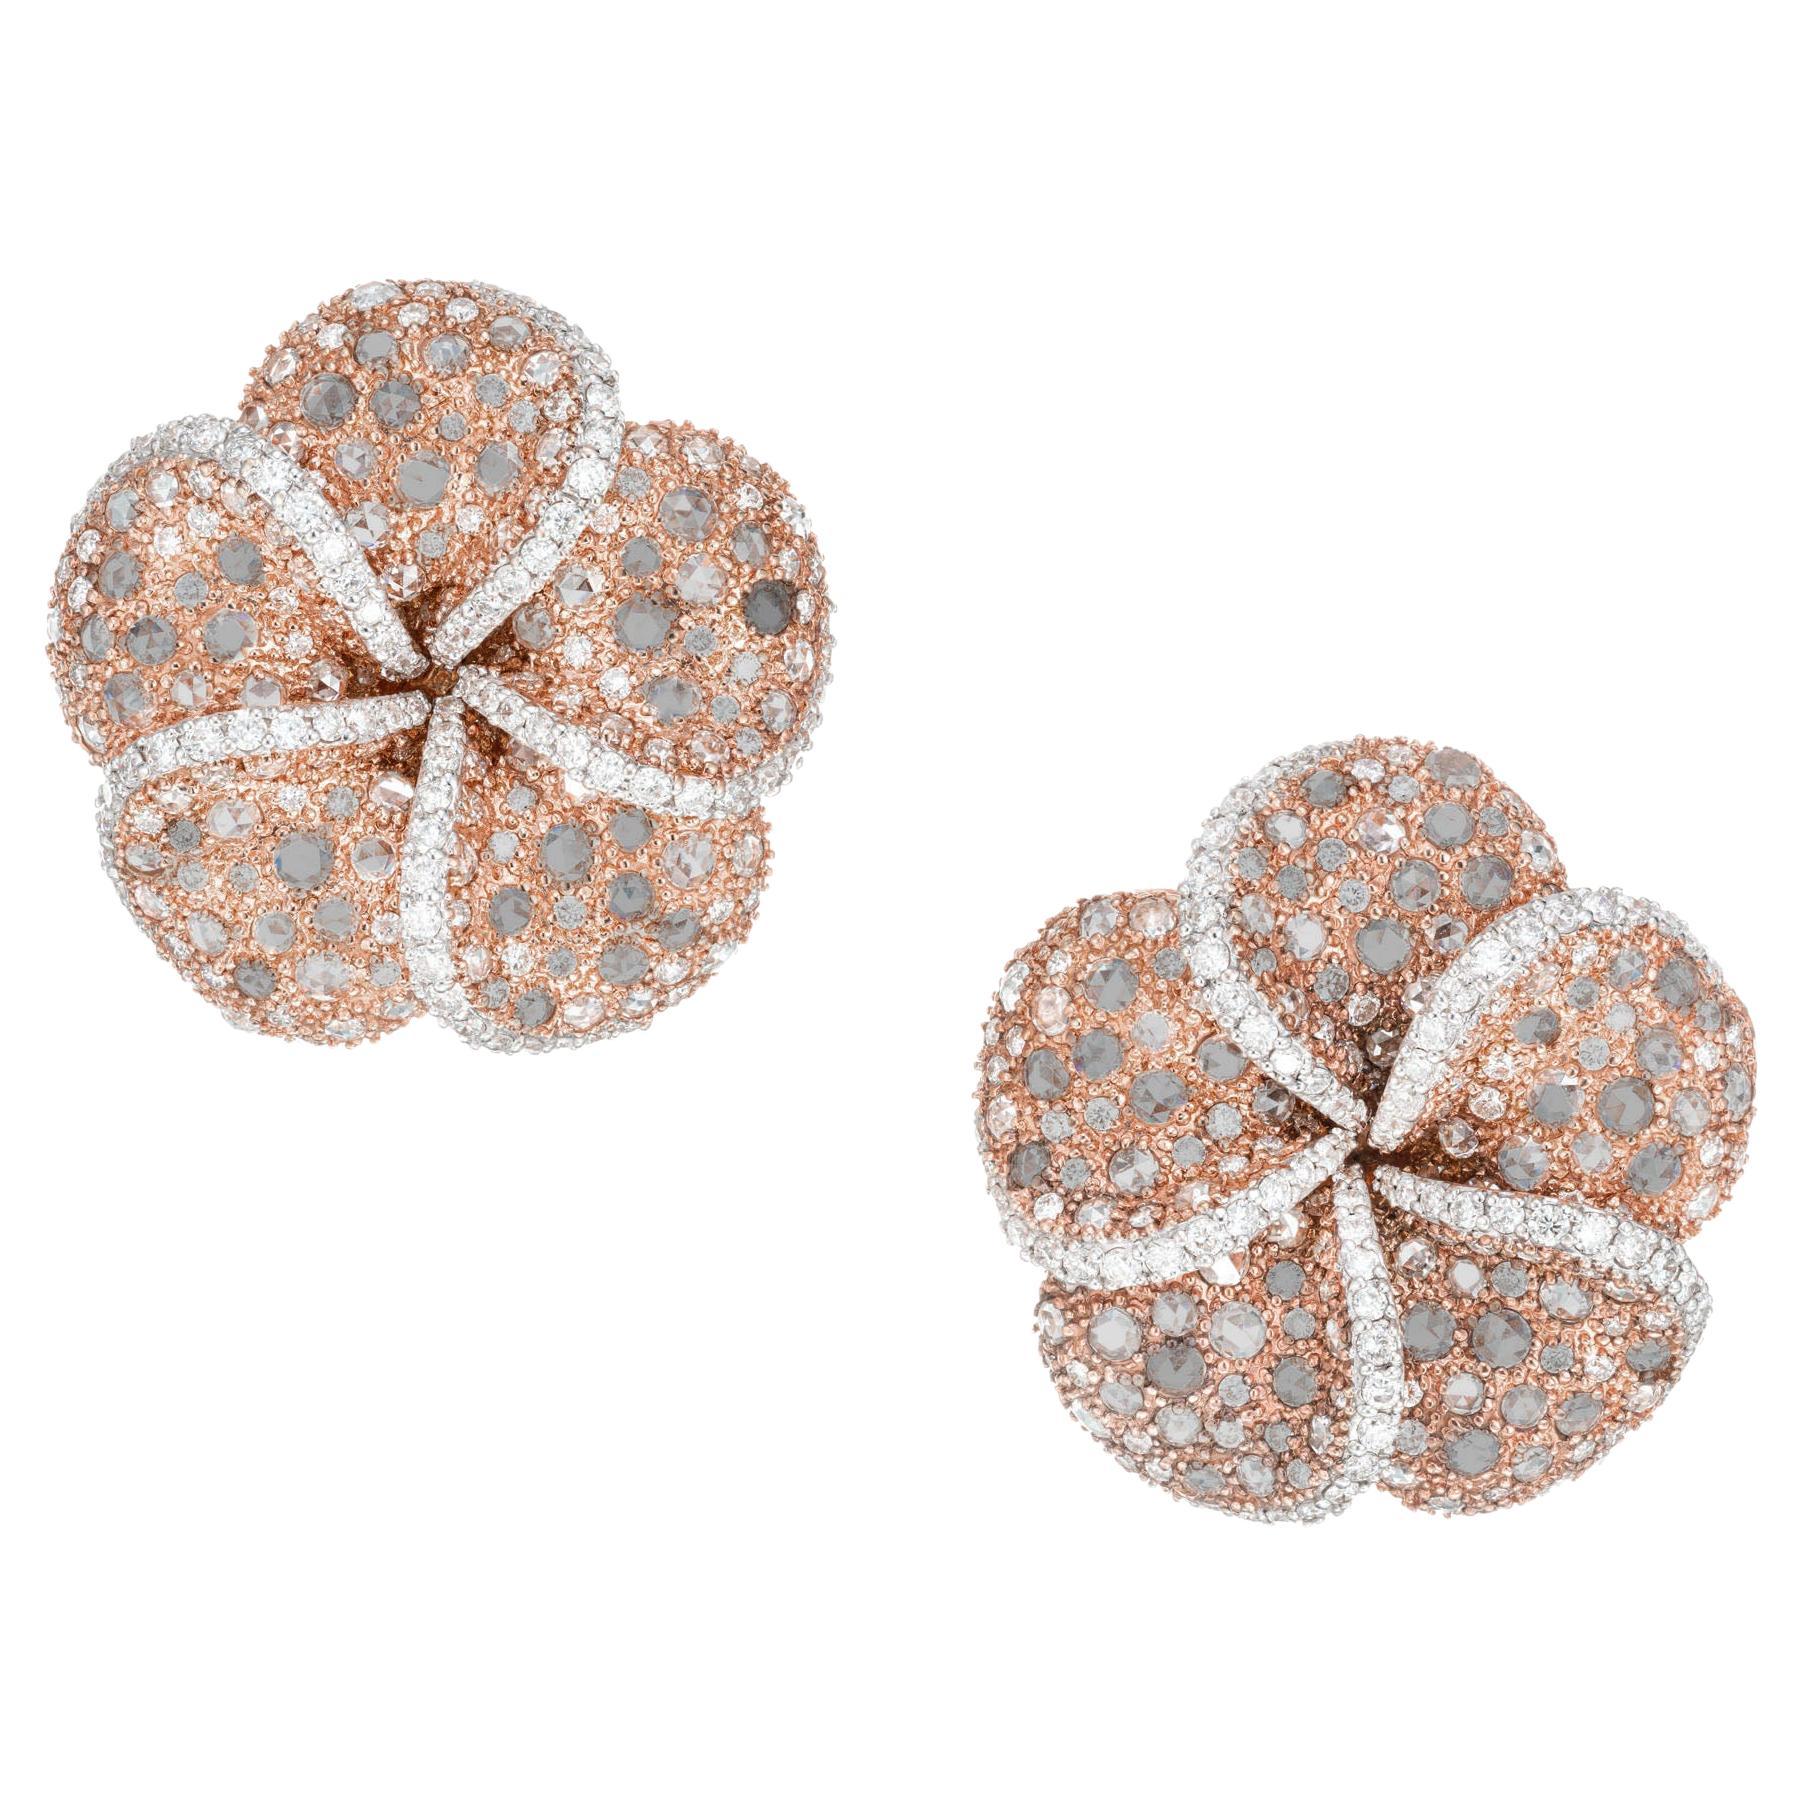 5 Carat Round Rose Cut Diamond Rose Gold Clip Post Flower Earrings For Sale